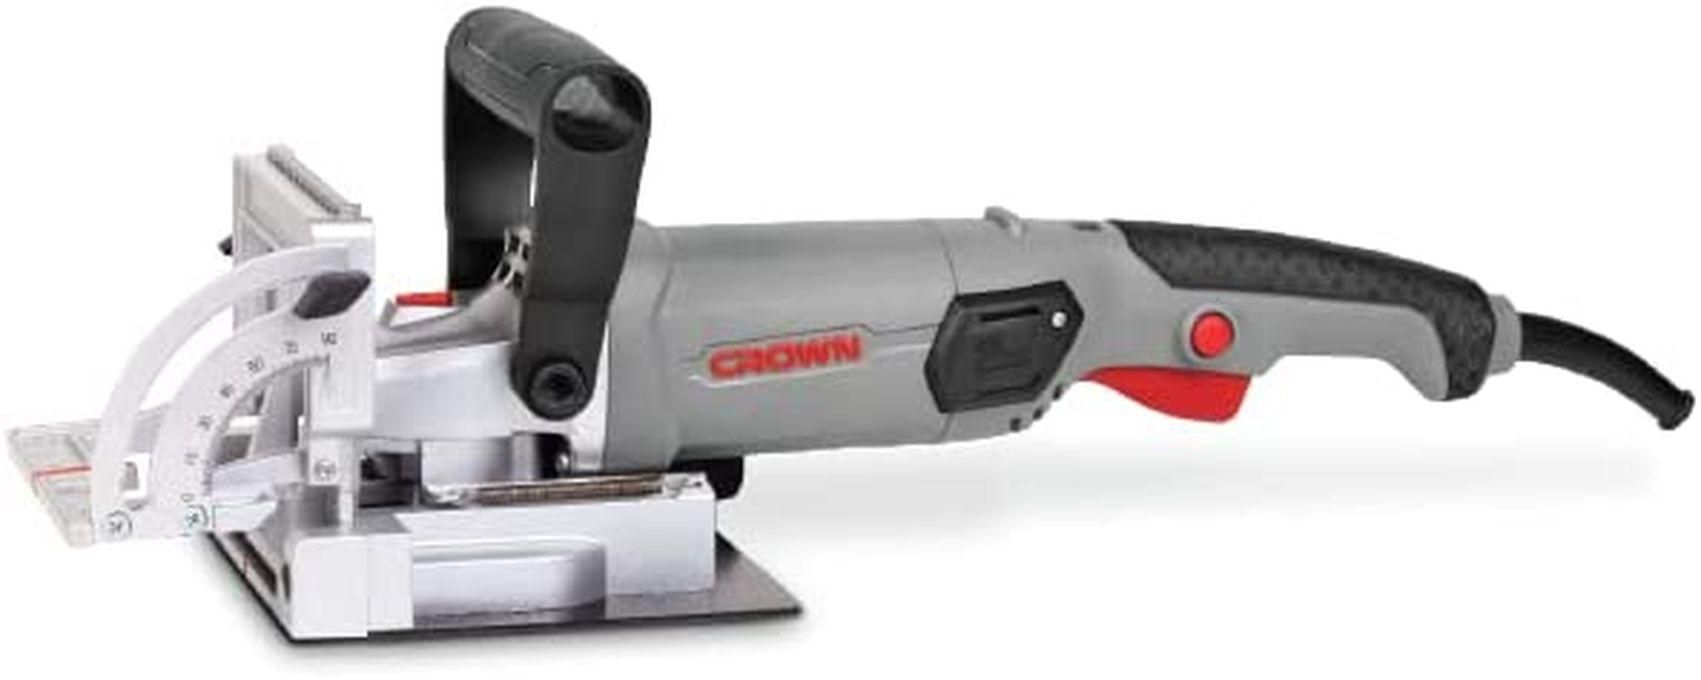 Crown Biscuit Jointer 860W 4 Inches CT13587